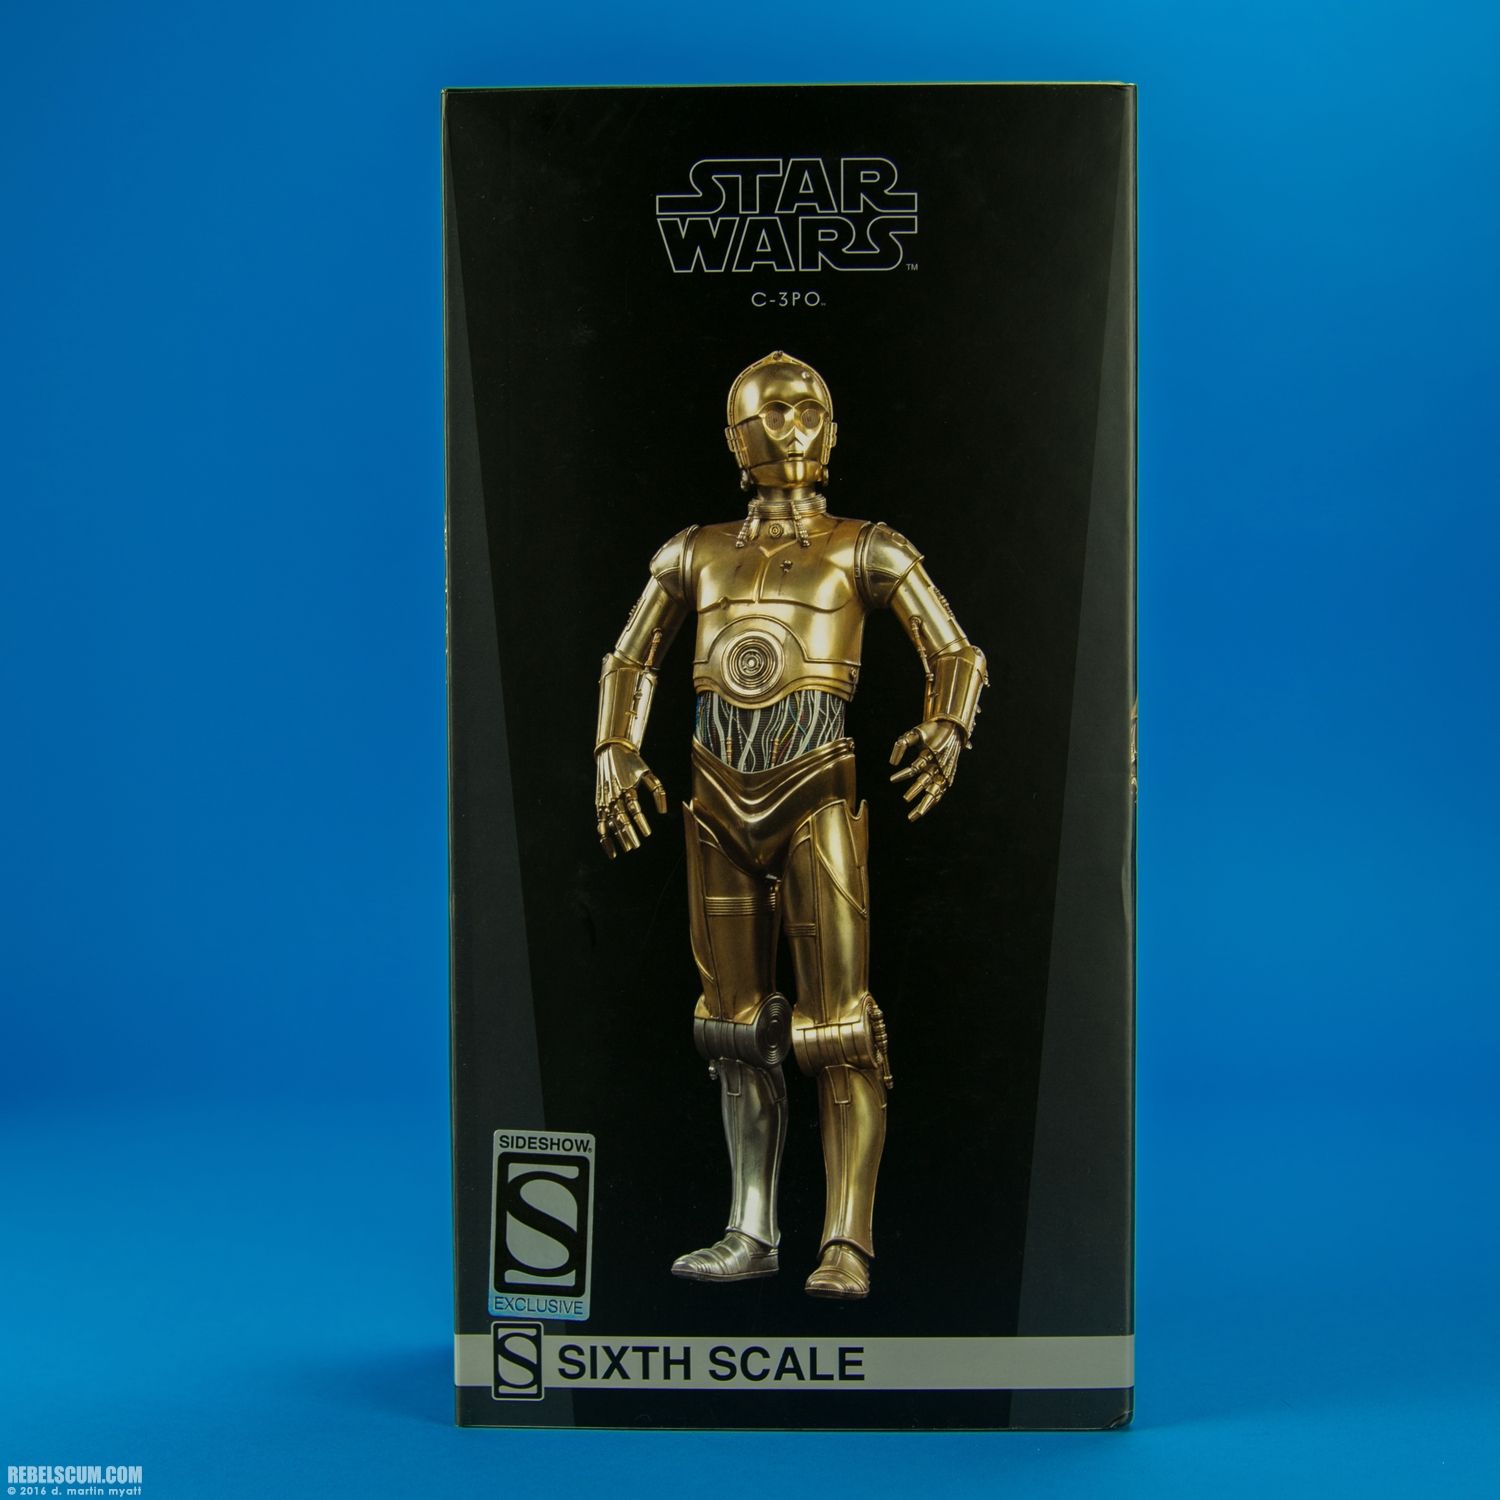 C-3PO-Sixth-Scale-Figure-Sideshow-Collectibles-023.jpg